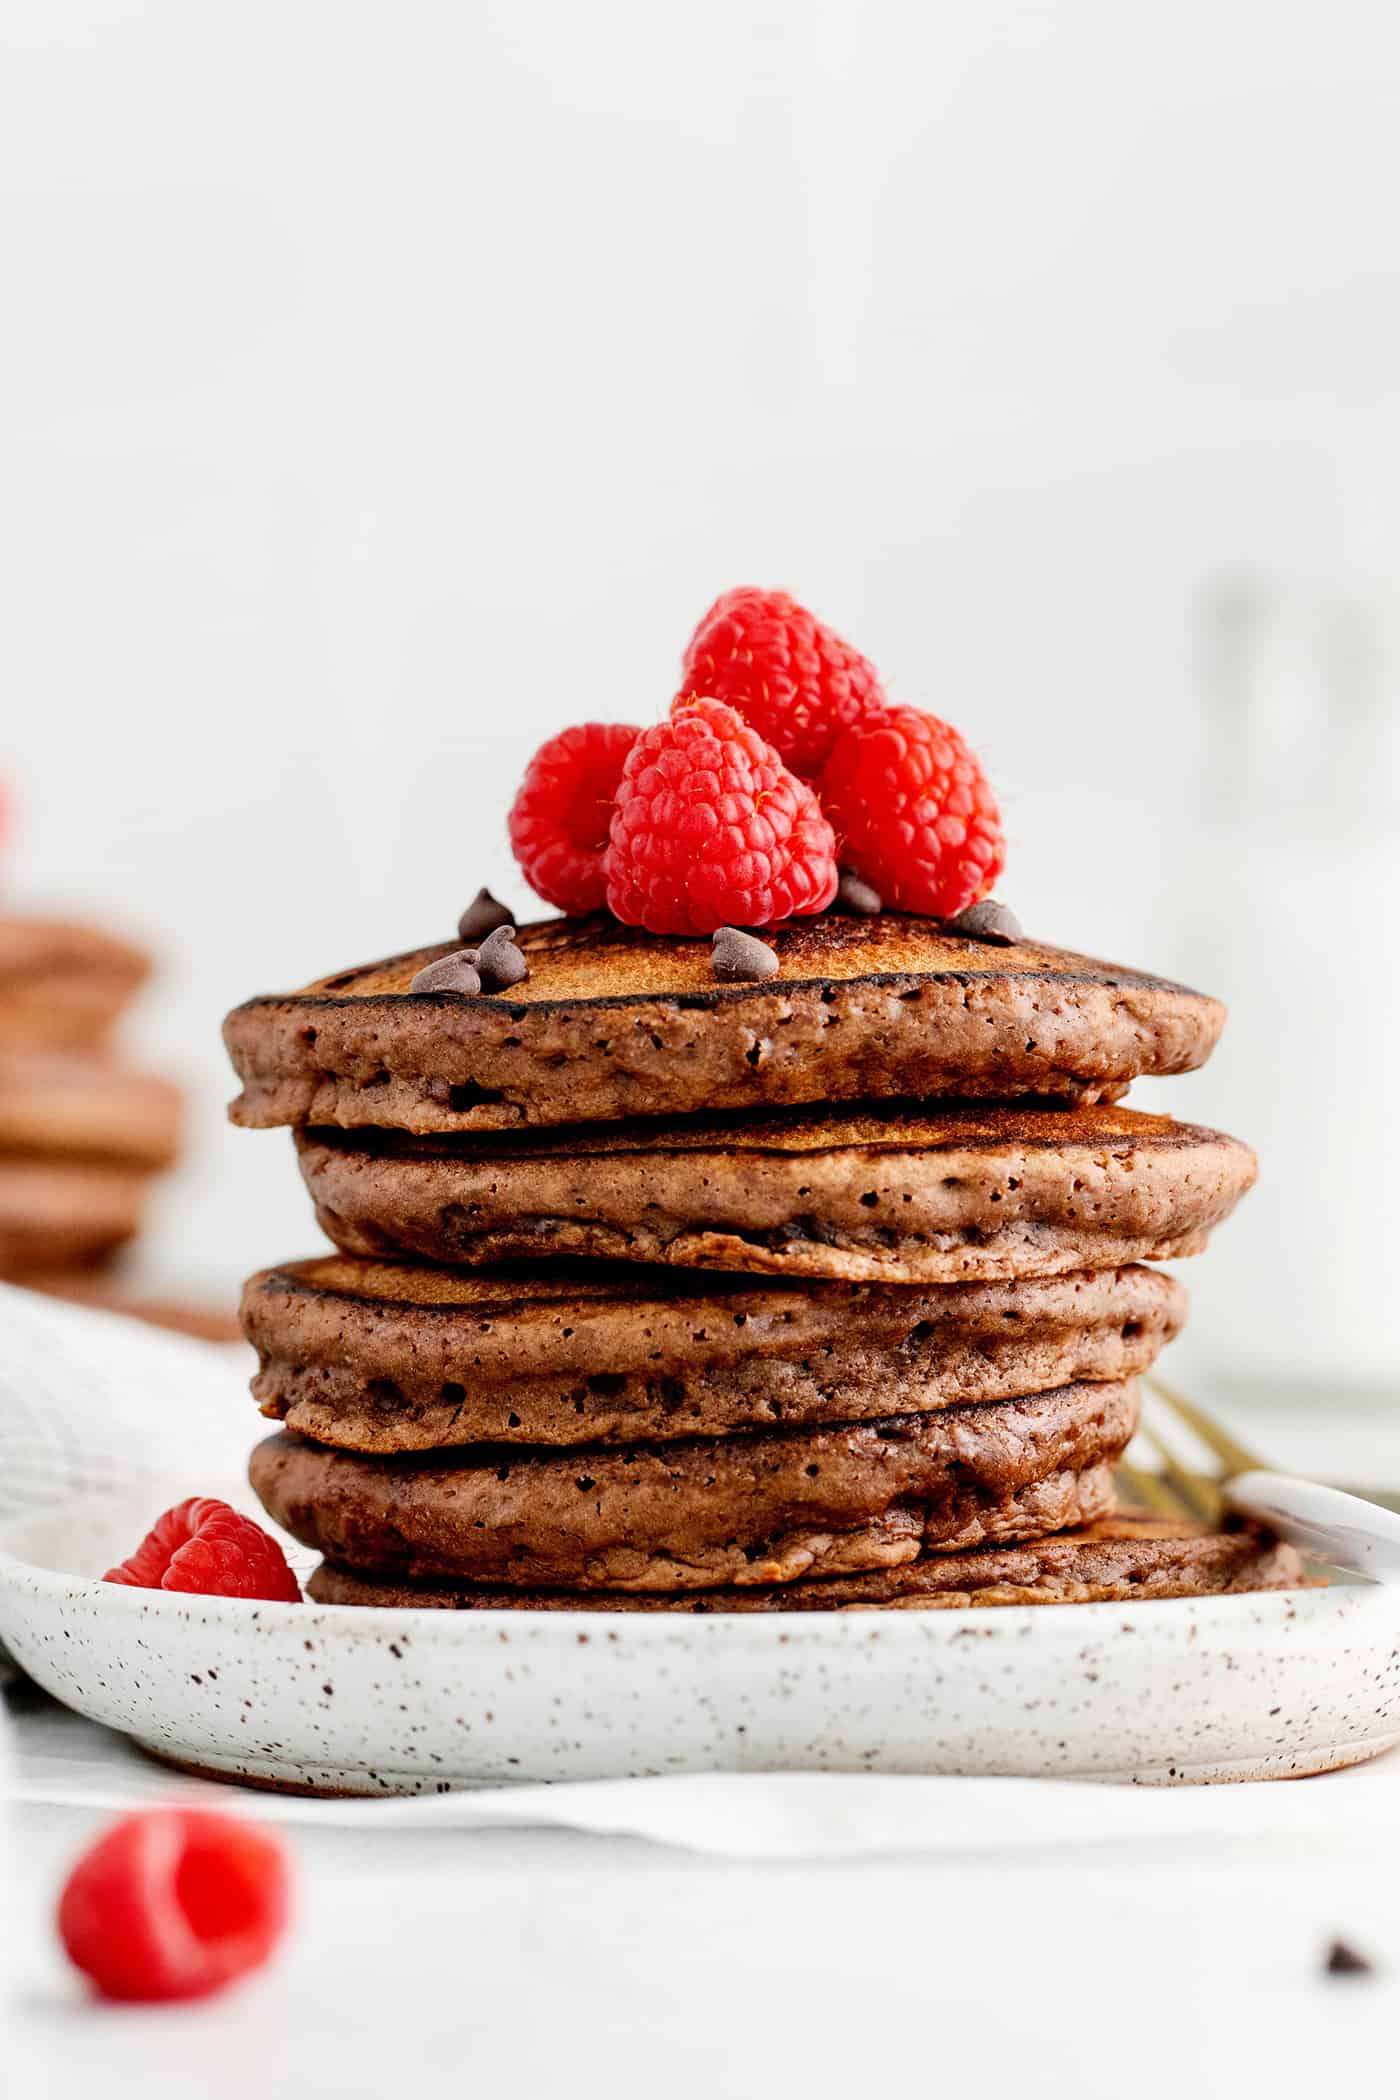 A stack of chocolate pancakes topped with raspberries on a white plate